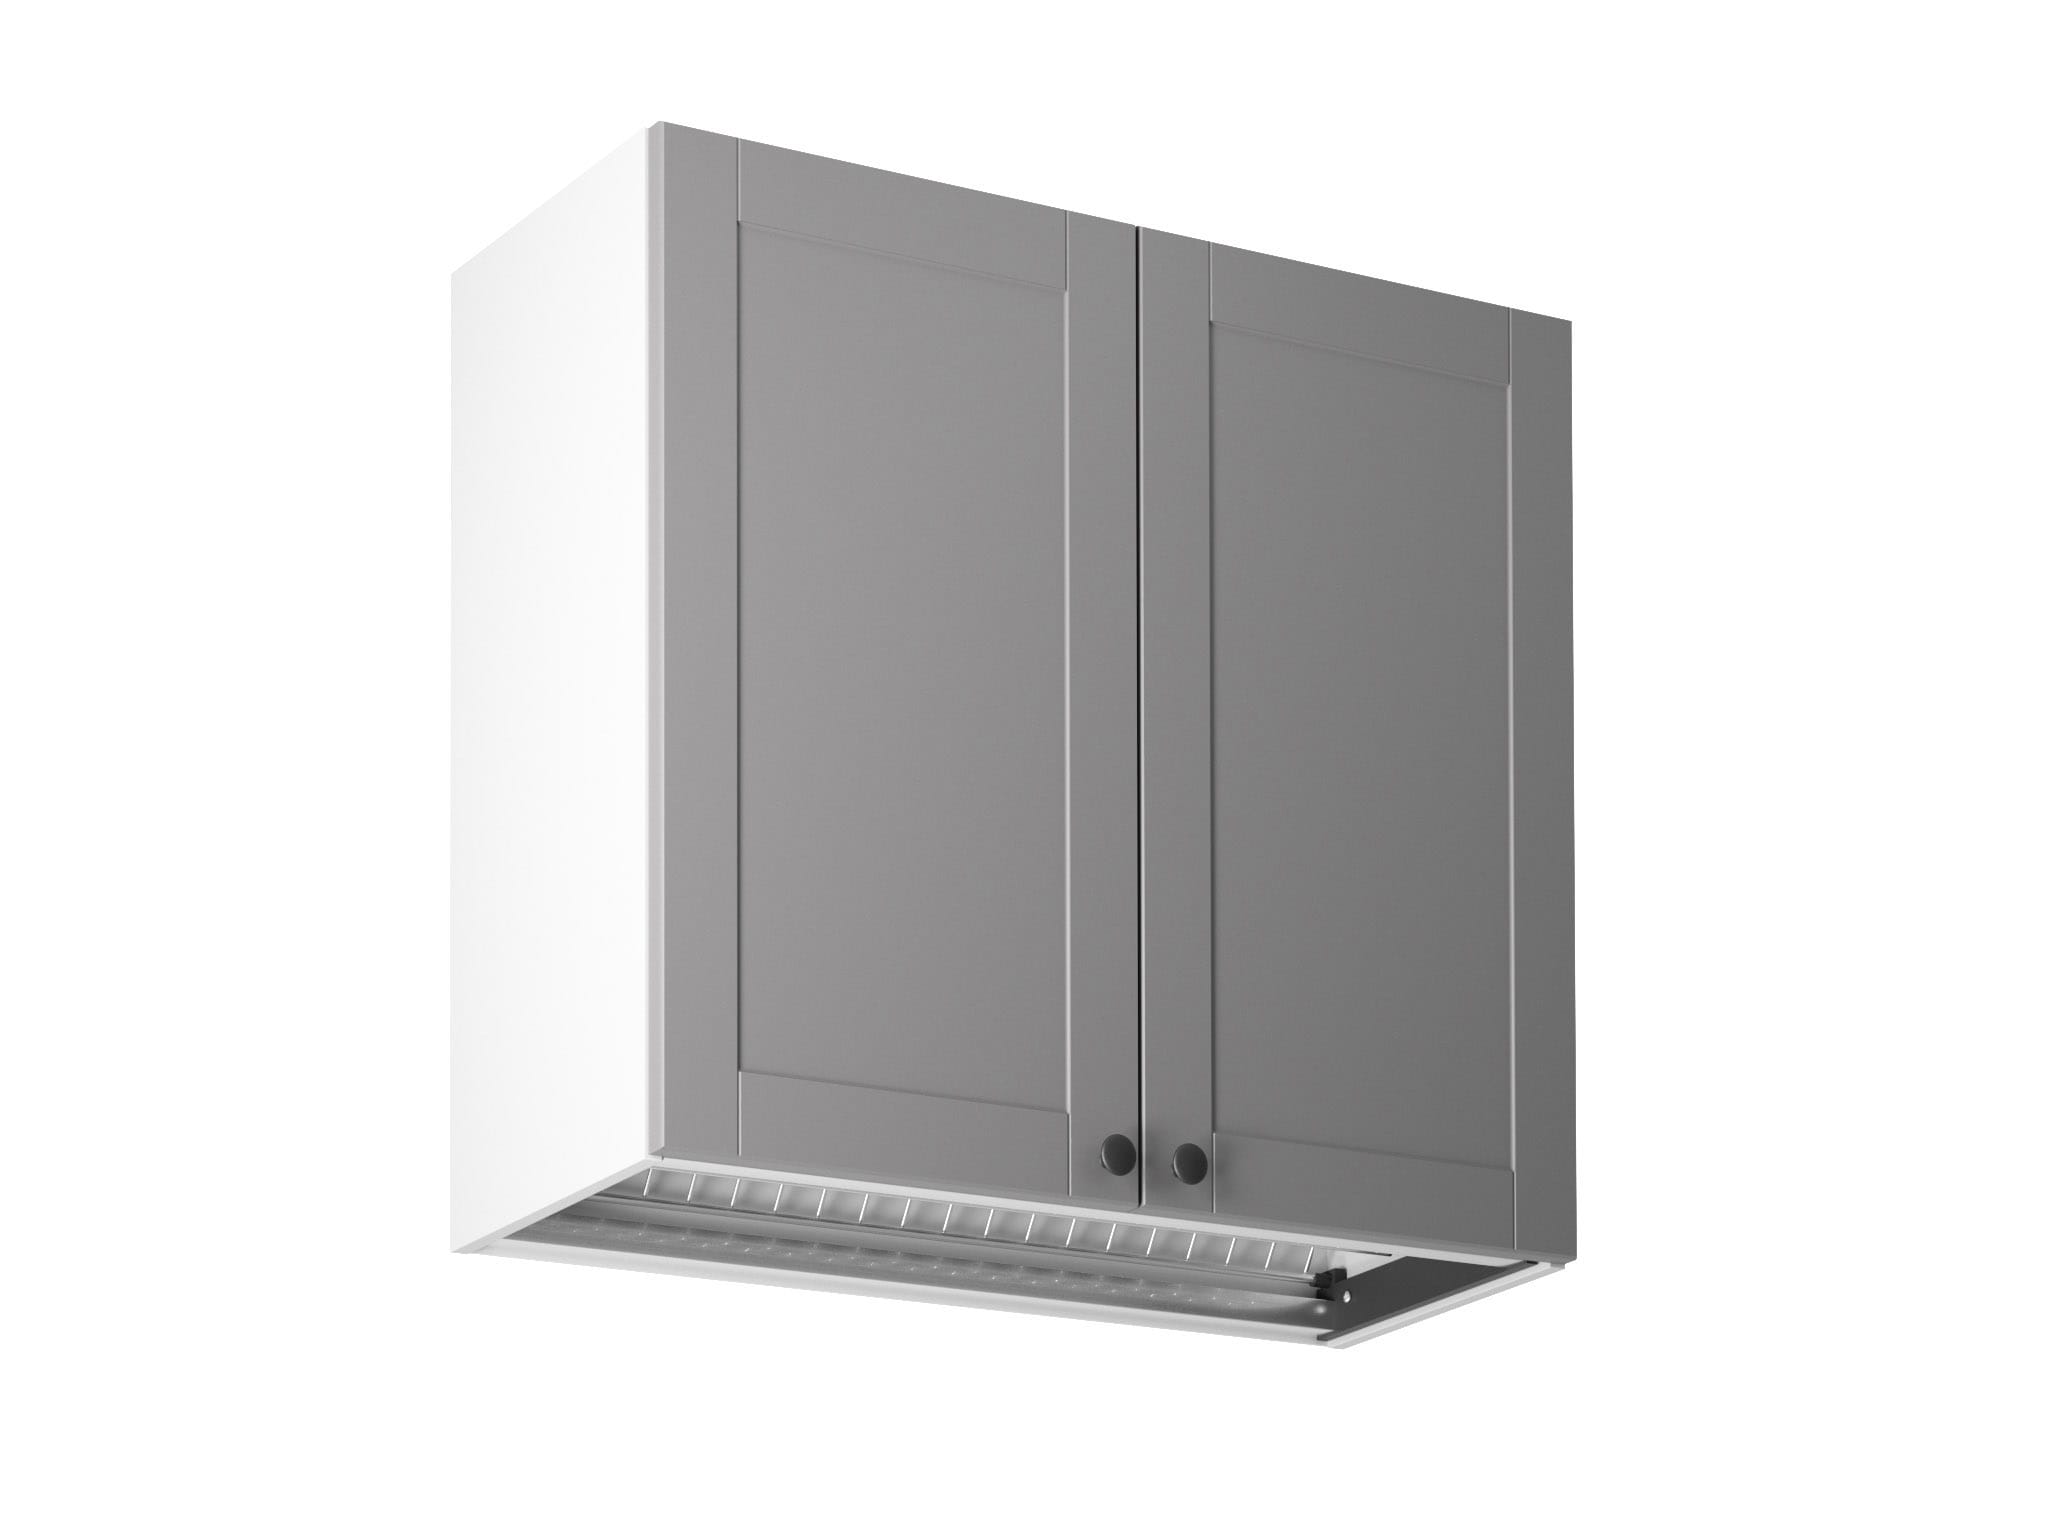 TWO-DOOR KITCHEN WALL CABINET IN WHITE FOR THE MODERN KITCHEN G80